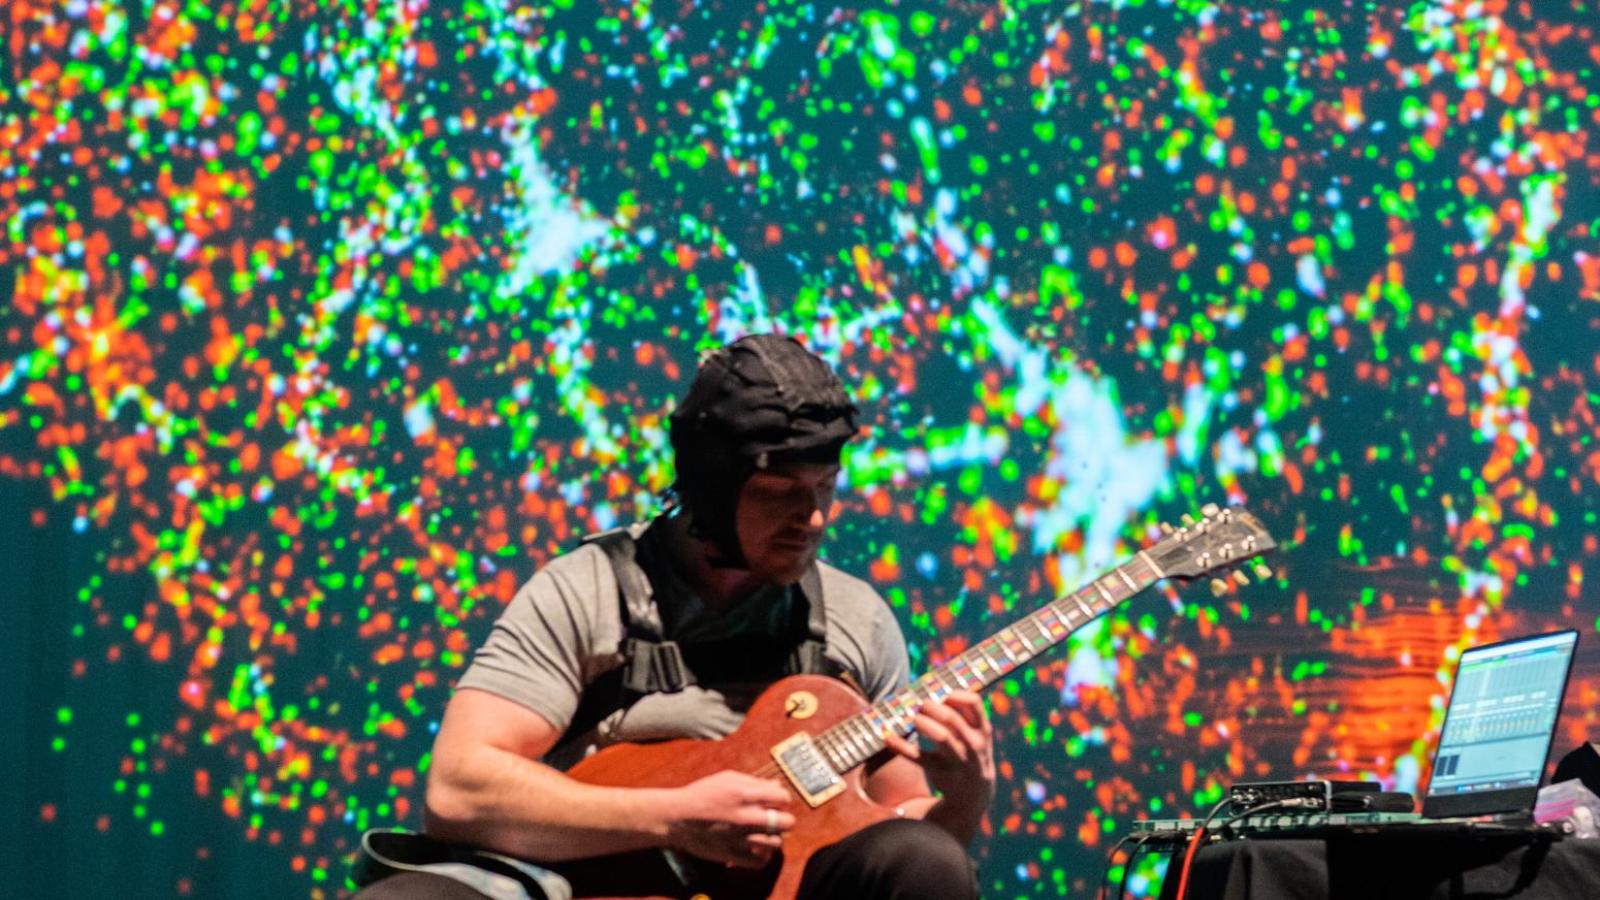 projection of exploding colors in the background while man performs guitar